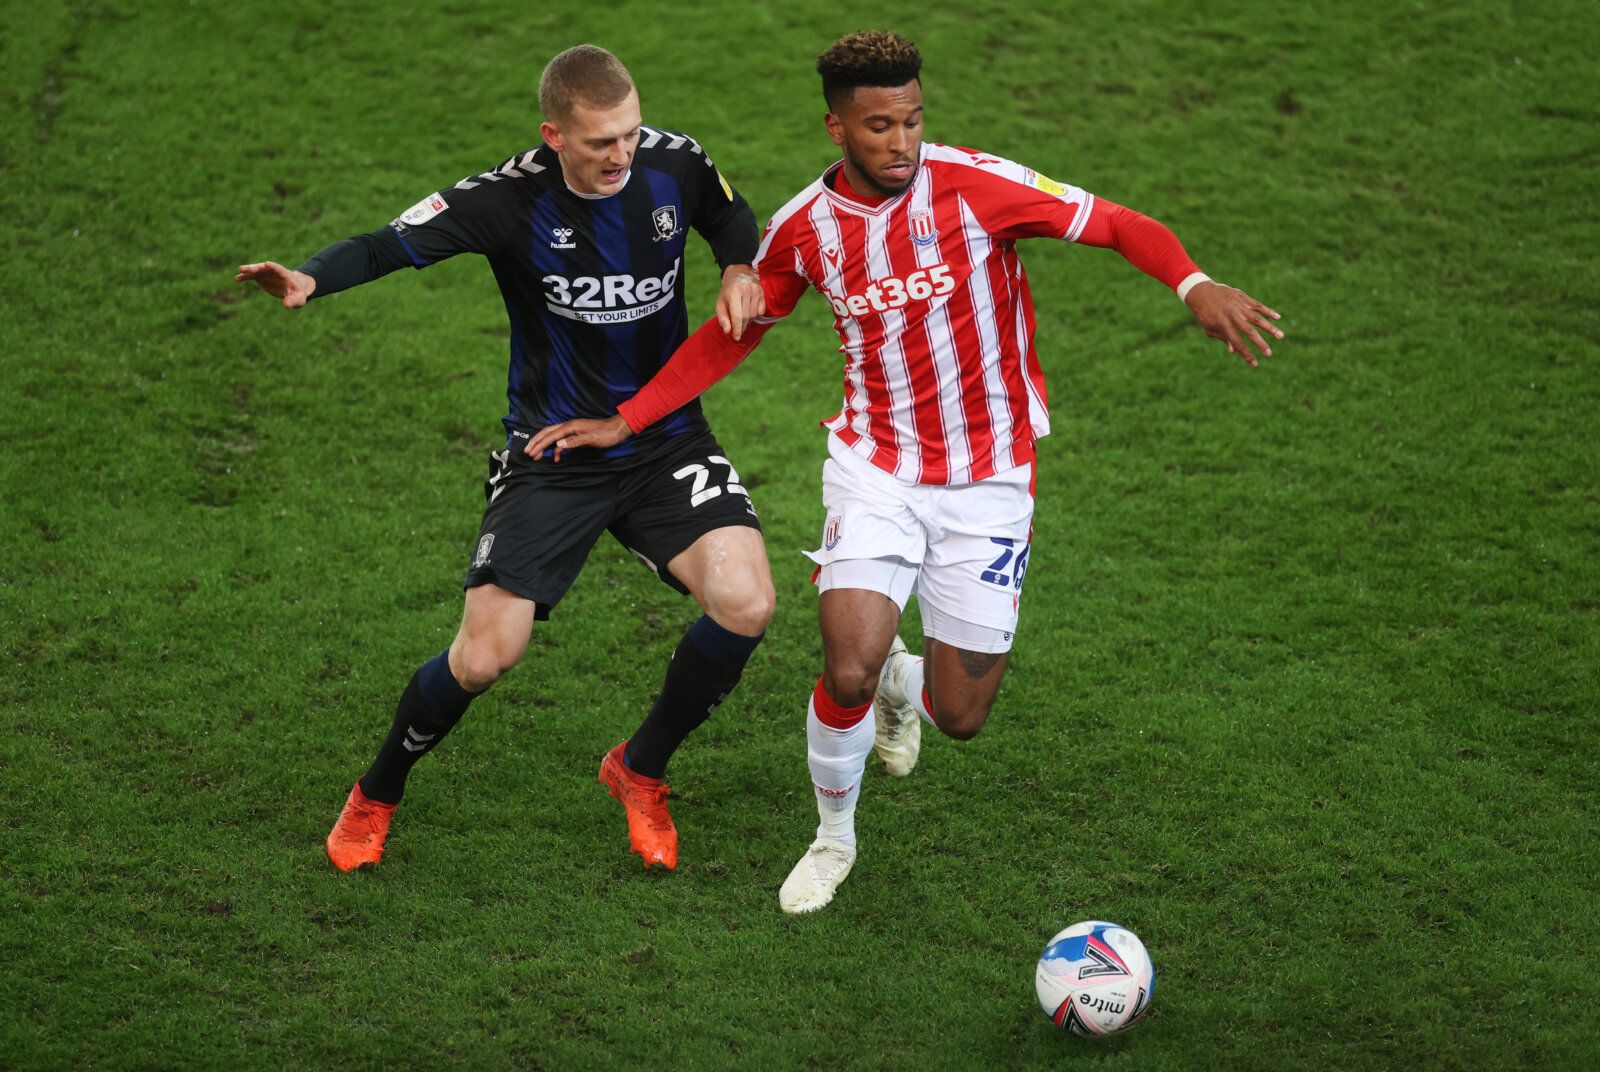 Soccer Football - Championship - Stoke City v Middlesbrough - bet365 Stadium, Stoke-on-Trent, Britain - December 5, 2020 Stoke City's Tyrese Campbell in action with Middlesbrough's George Saville Action Images/Carl Recine EDITORIAL USE ONLY. No use with unauthorized audio, video, data, fixture lists, club/league logos or 'live' services. Online in-match use limited to 75 images, no video emulation. No use in betting, games or single club /league/player publications.  Please contact your account 